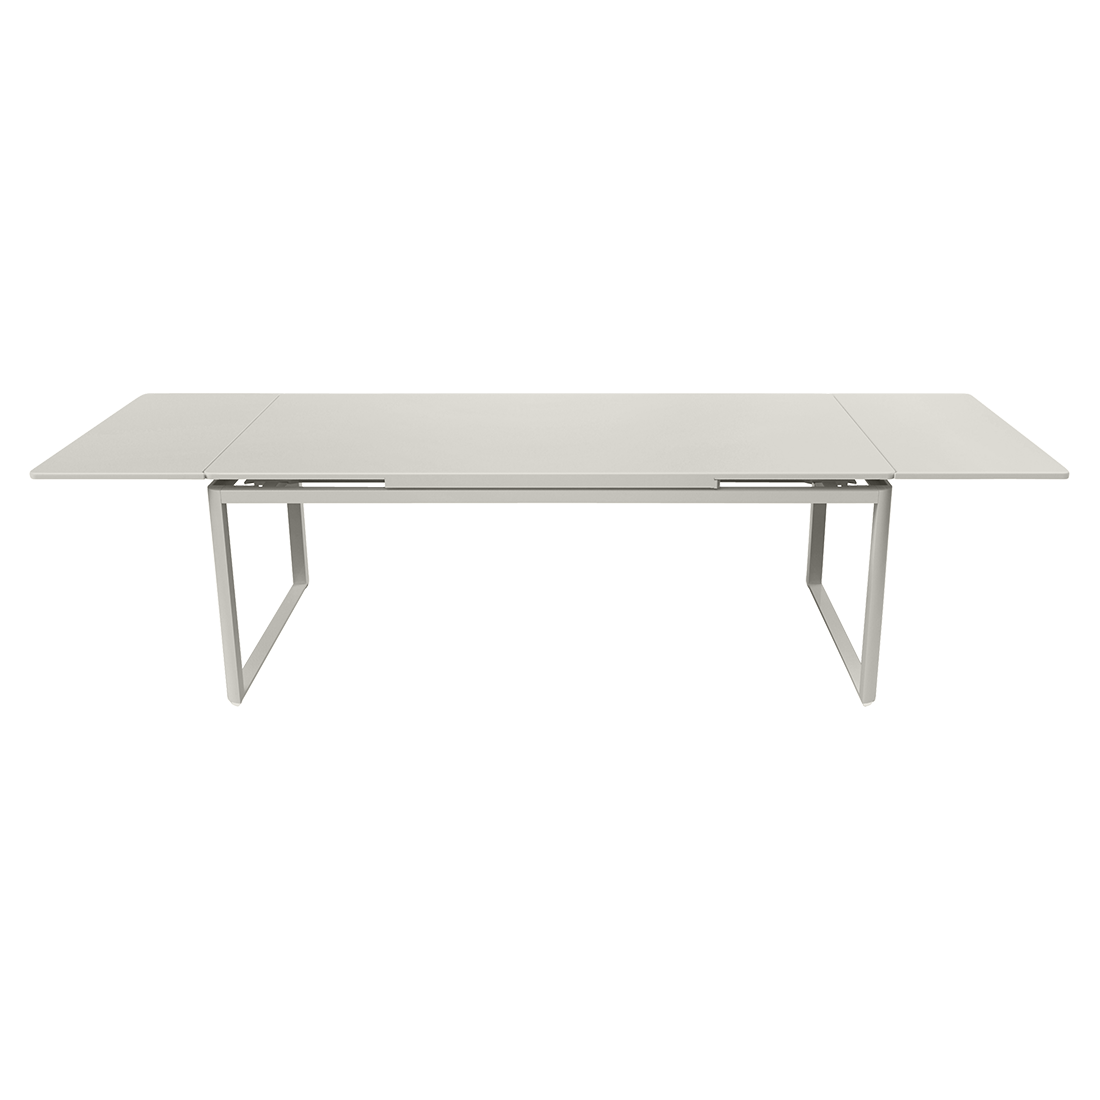 Biarritz Table with Extensions